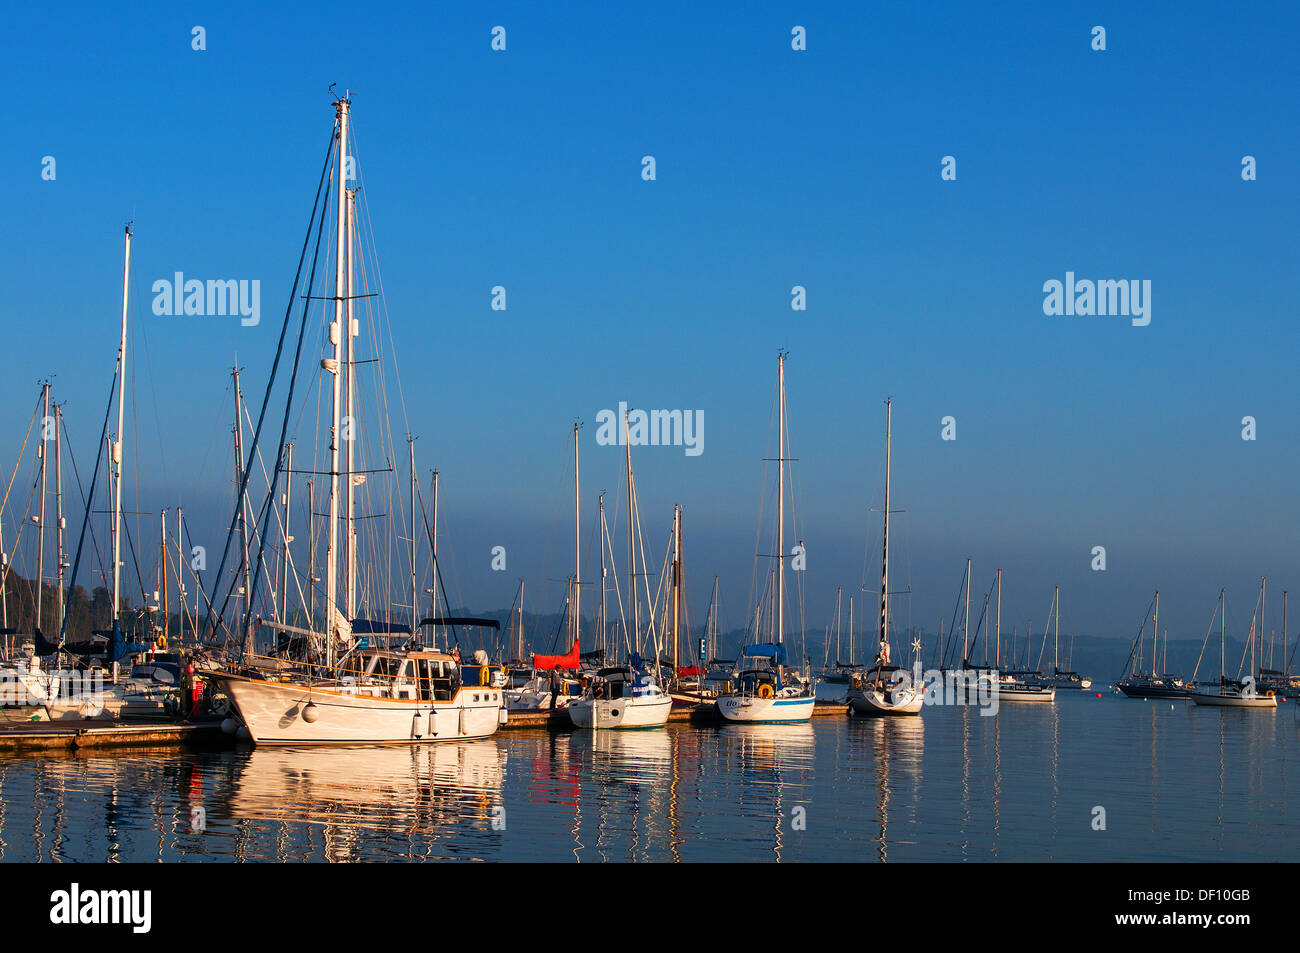 Yachts moored at Mylor harbour near Falmouth in Cornwall, UK Stock Photo